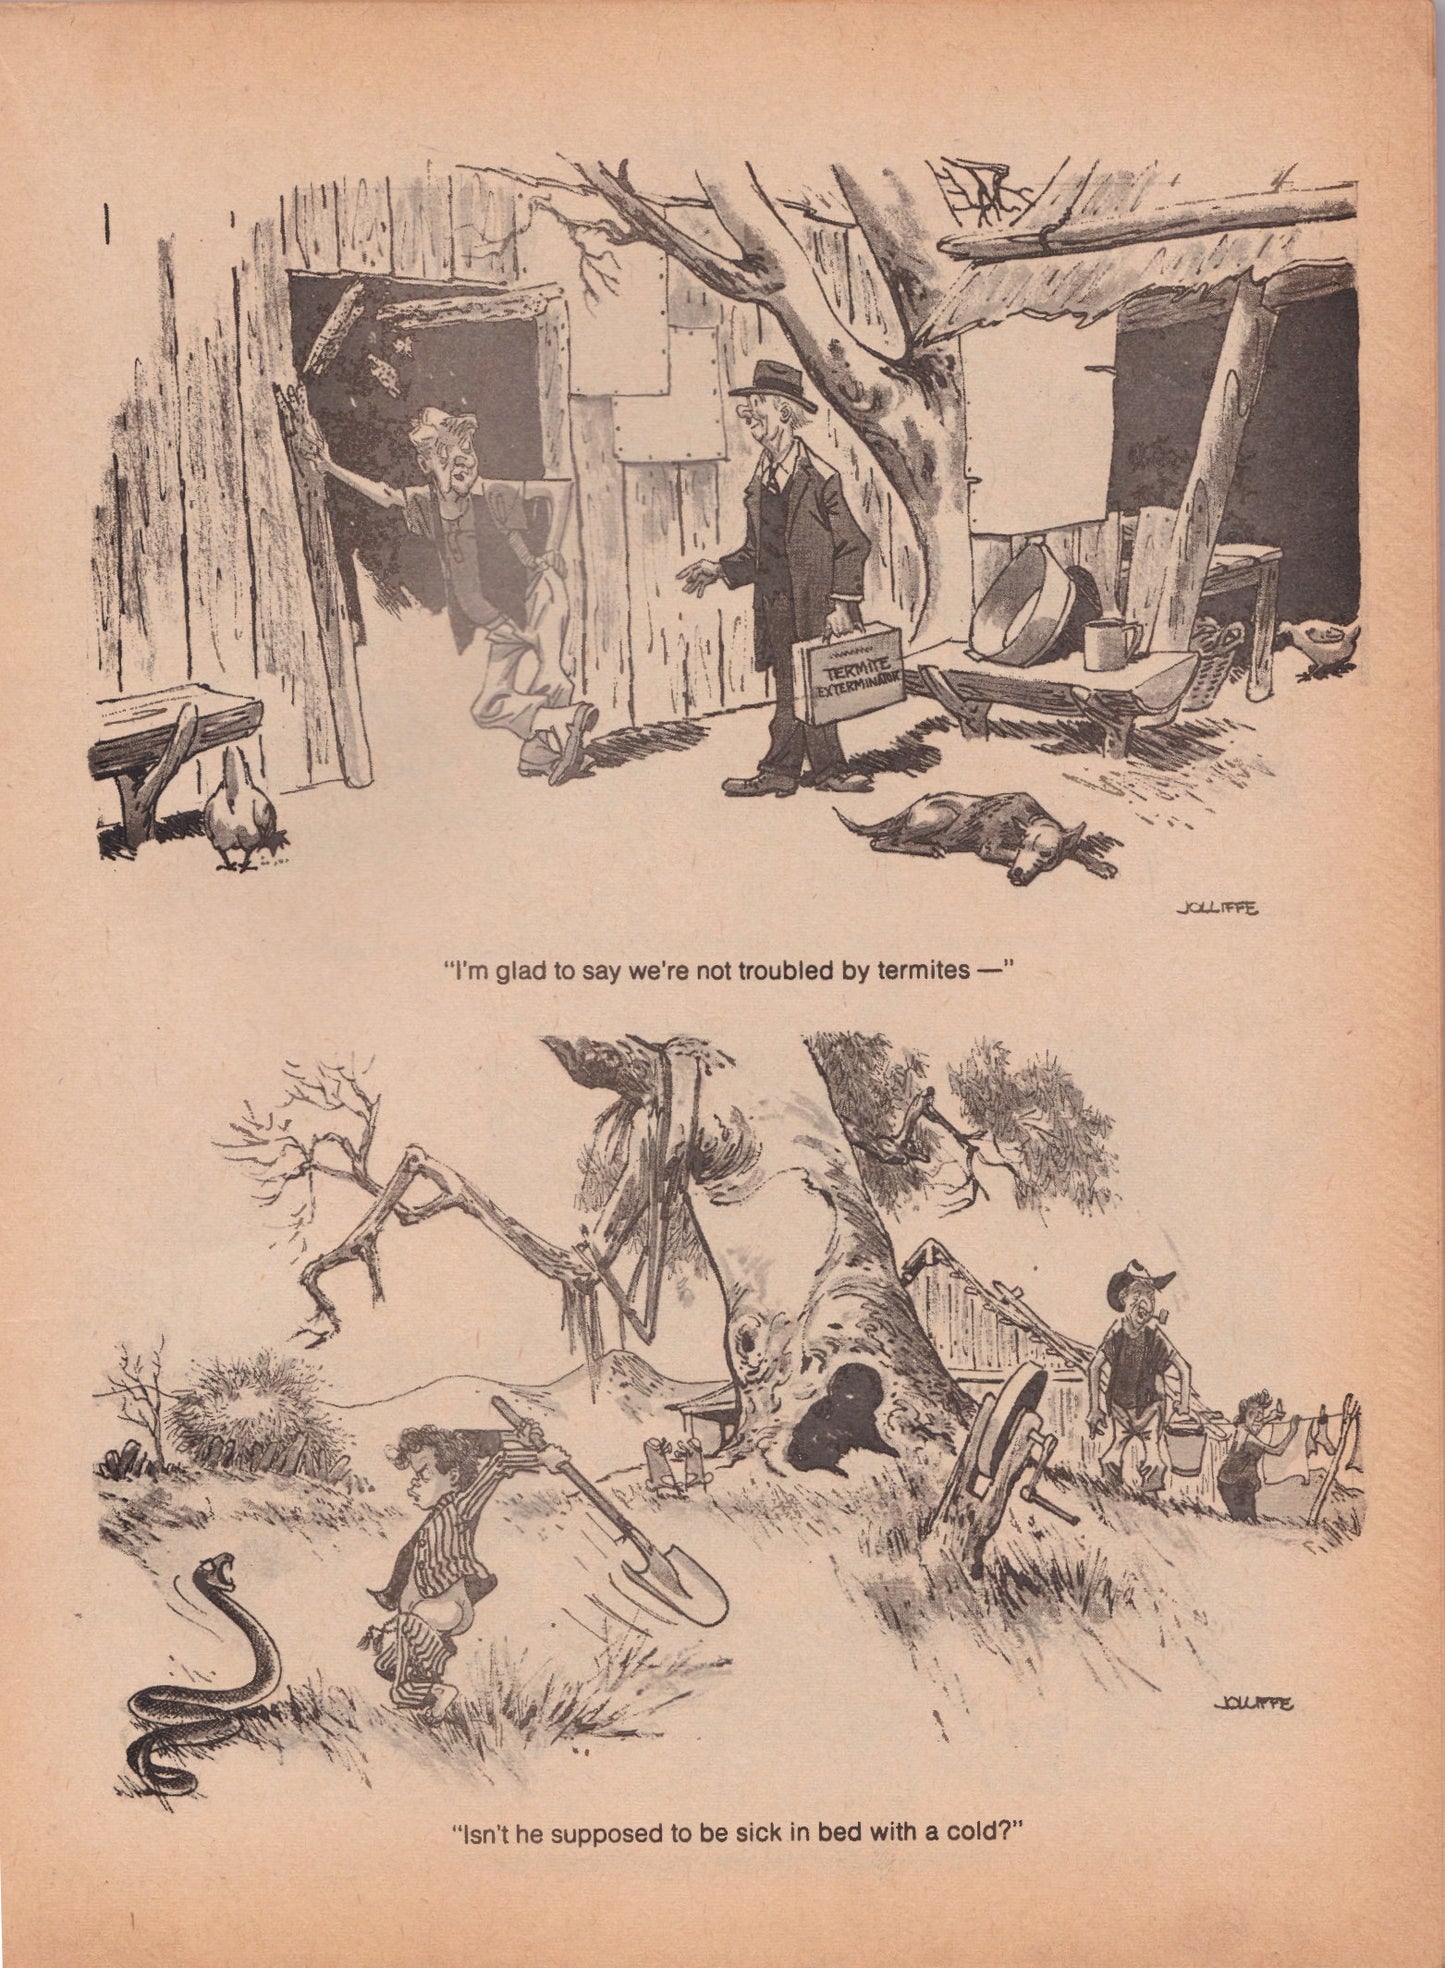 Jolliffe's Outback Cartoons And Australiana Study To Frame - Number 108 Aug 1979